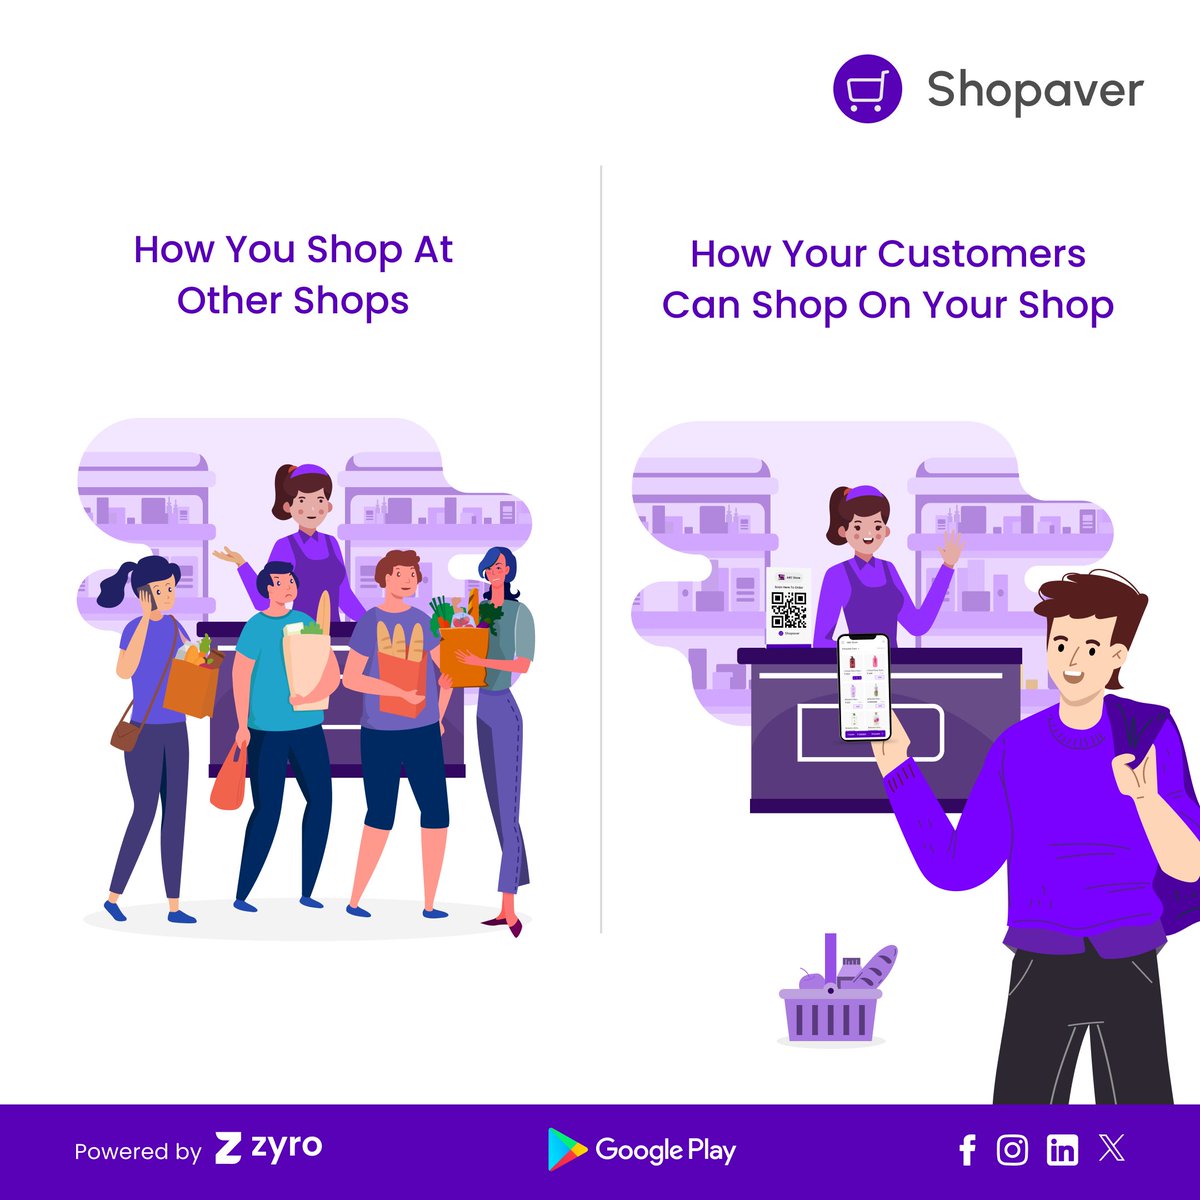 Enhance customer experience from Better to Best!

Shopaver's QR Code enables instant shopping magic, eliminating queues. Customers scan and browse your inventory online, reducing waiting time. ⚡

#Shopaver #OnlinePayments #Viral #TechCommerce #VirtualShopping #MobileCommerce